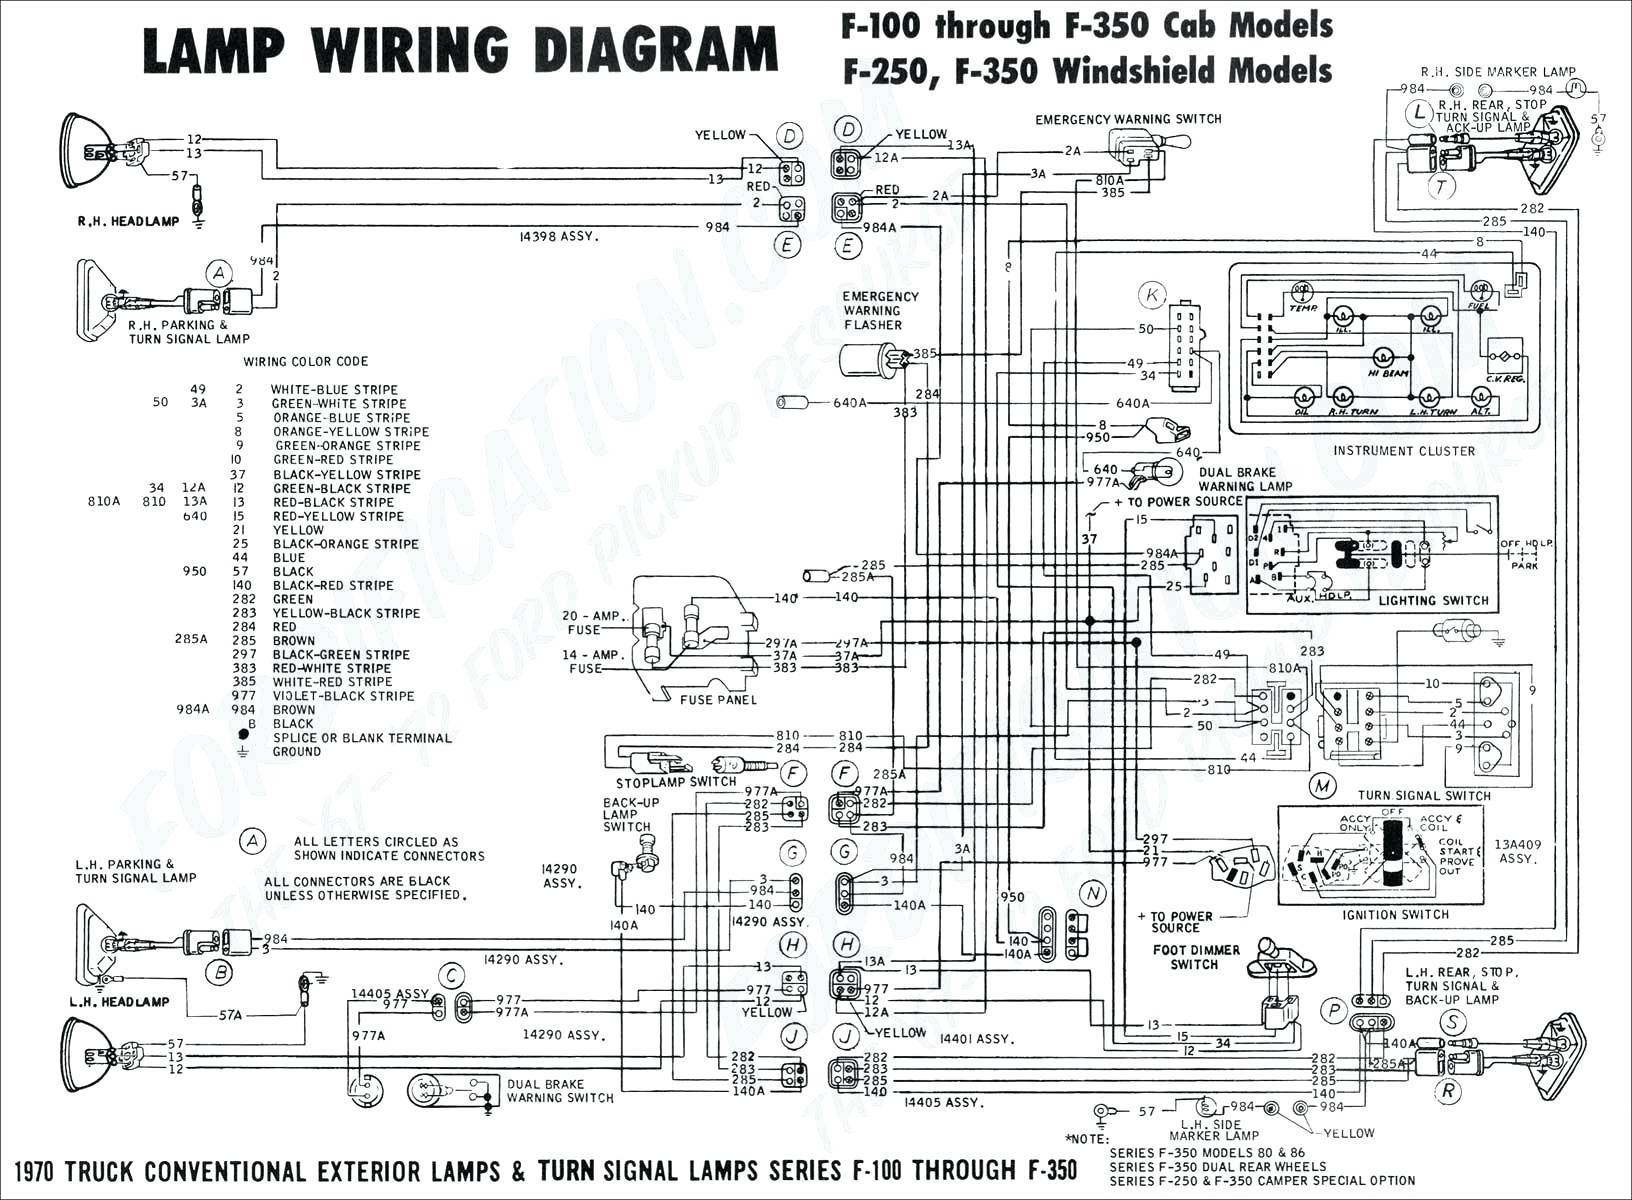 Wiring Diagram Kenwood Car Stereo sony Stereo Wiring Diagram Wiring Diagram Datasource Of Wiring Diagram Kenwood Car Stereo